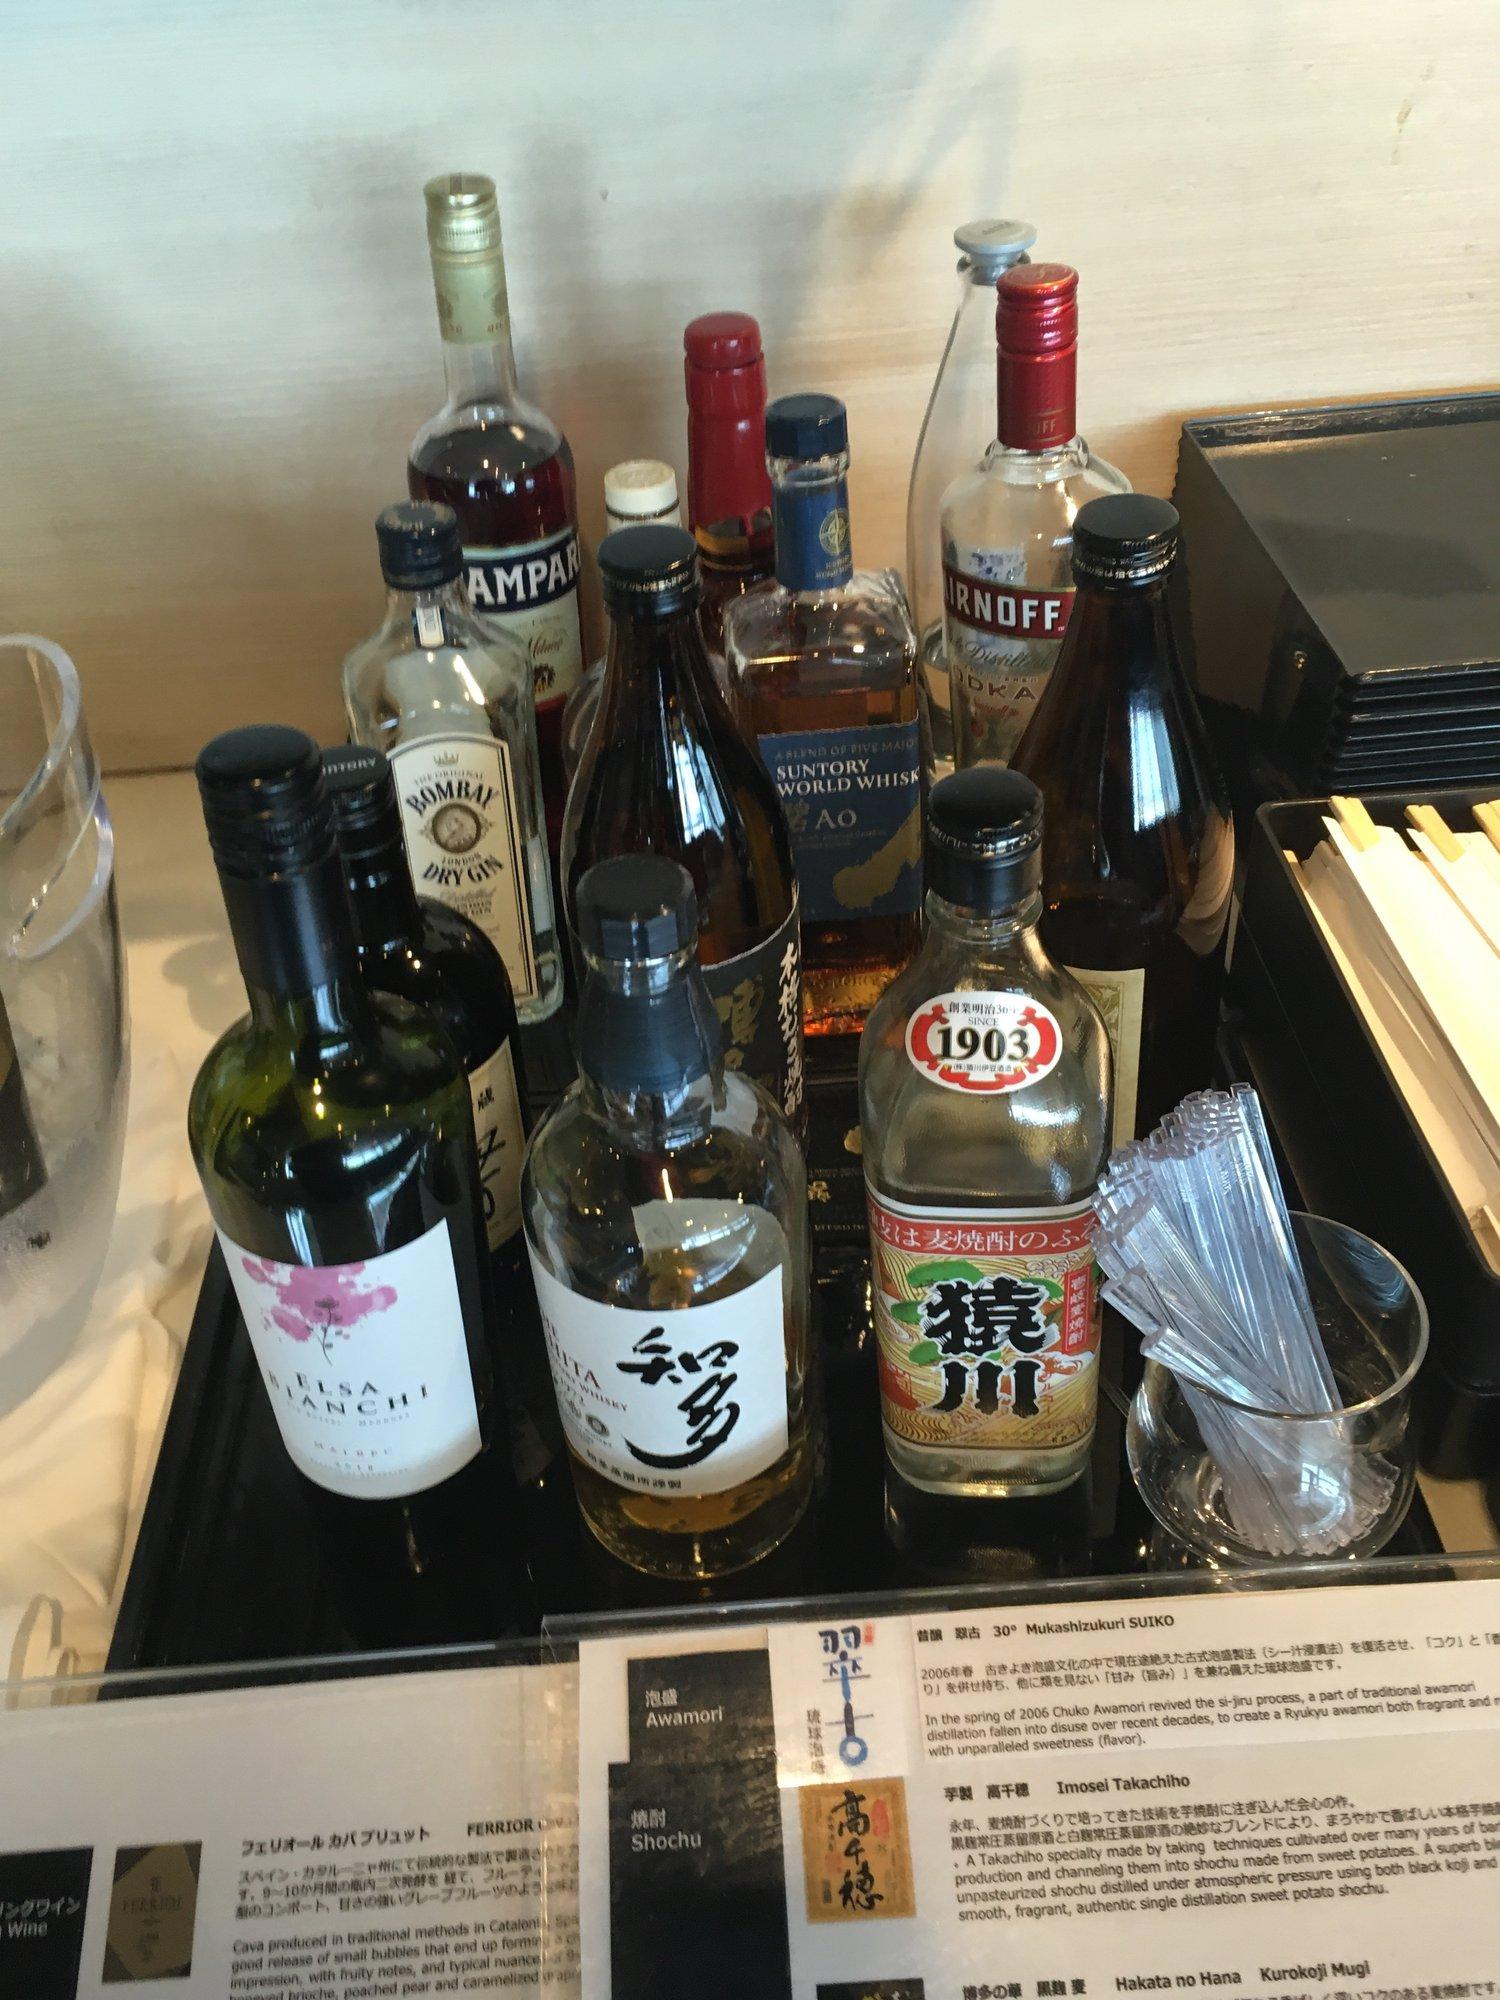 All Nippon Airways ANA Lounge (Gate 110) image 23 of 41